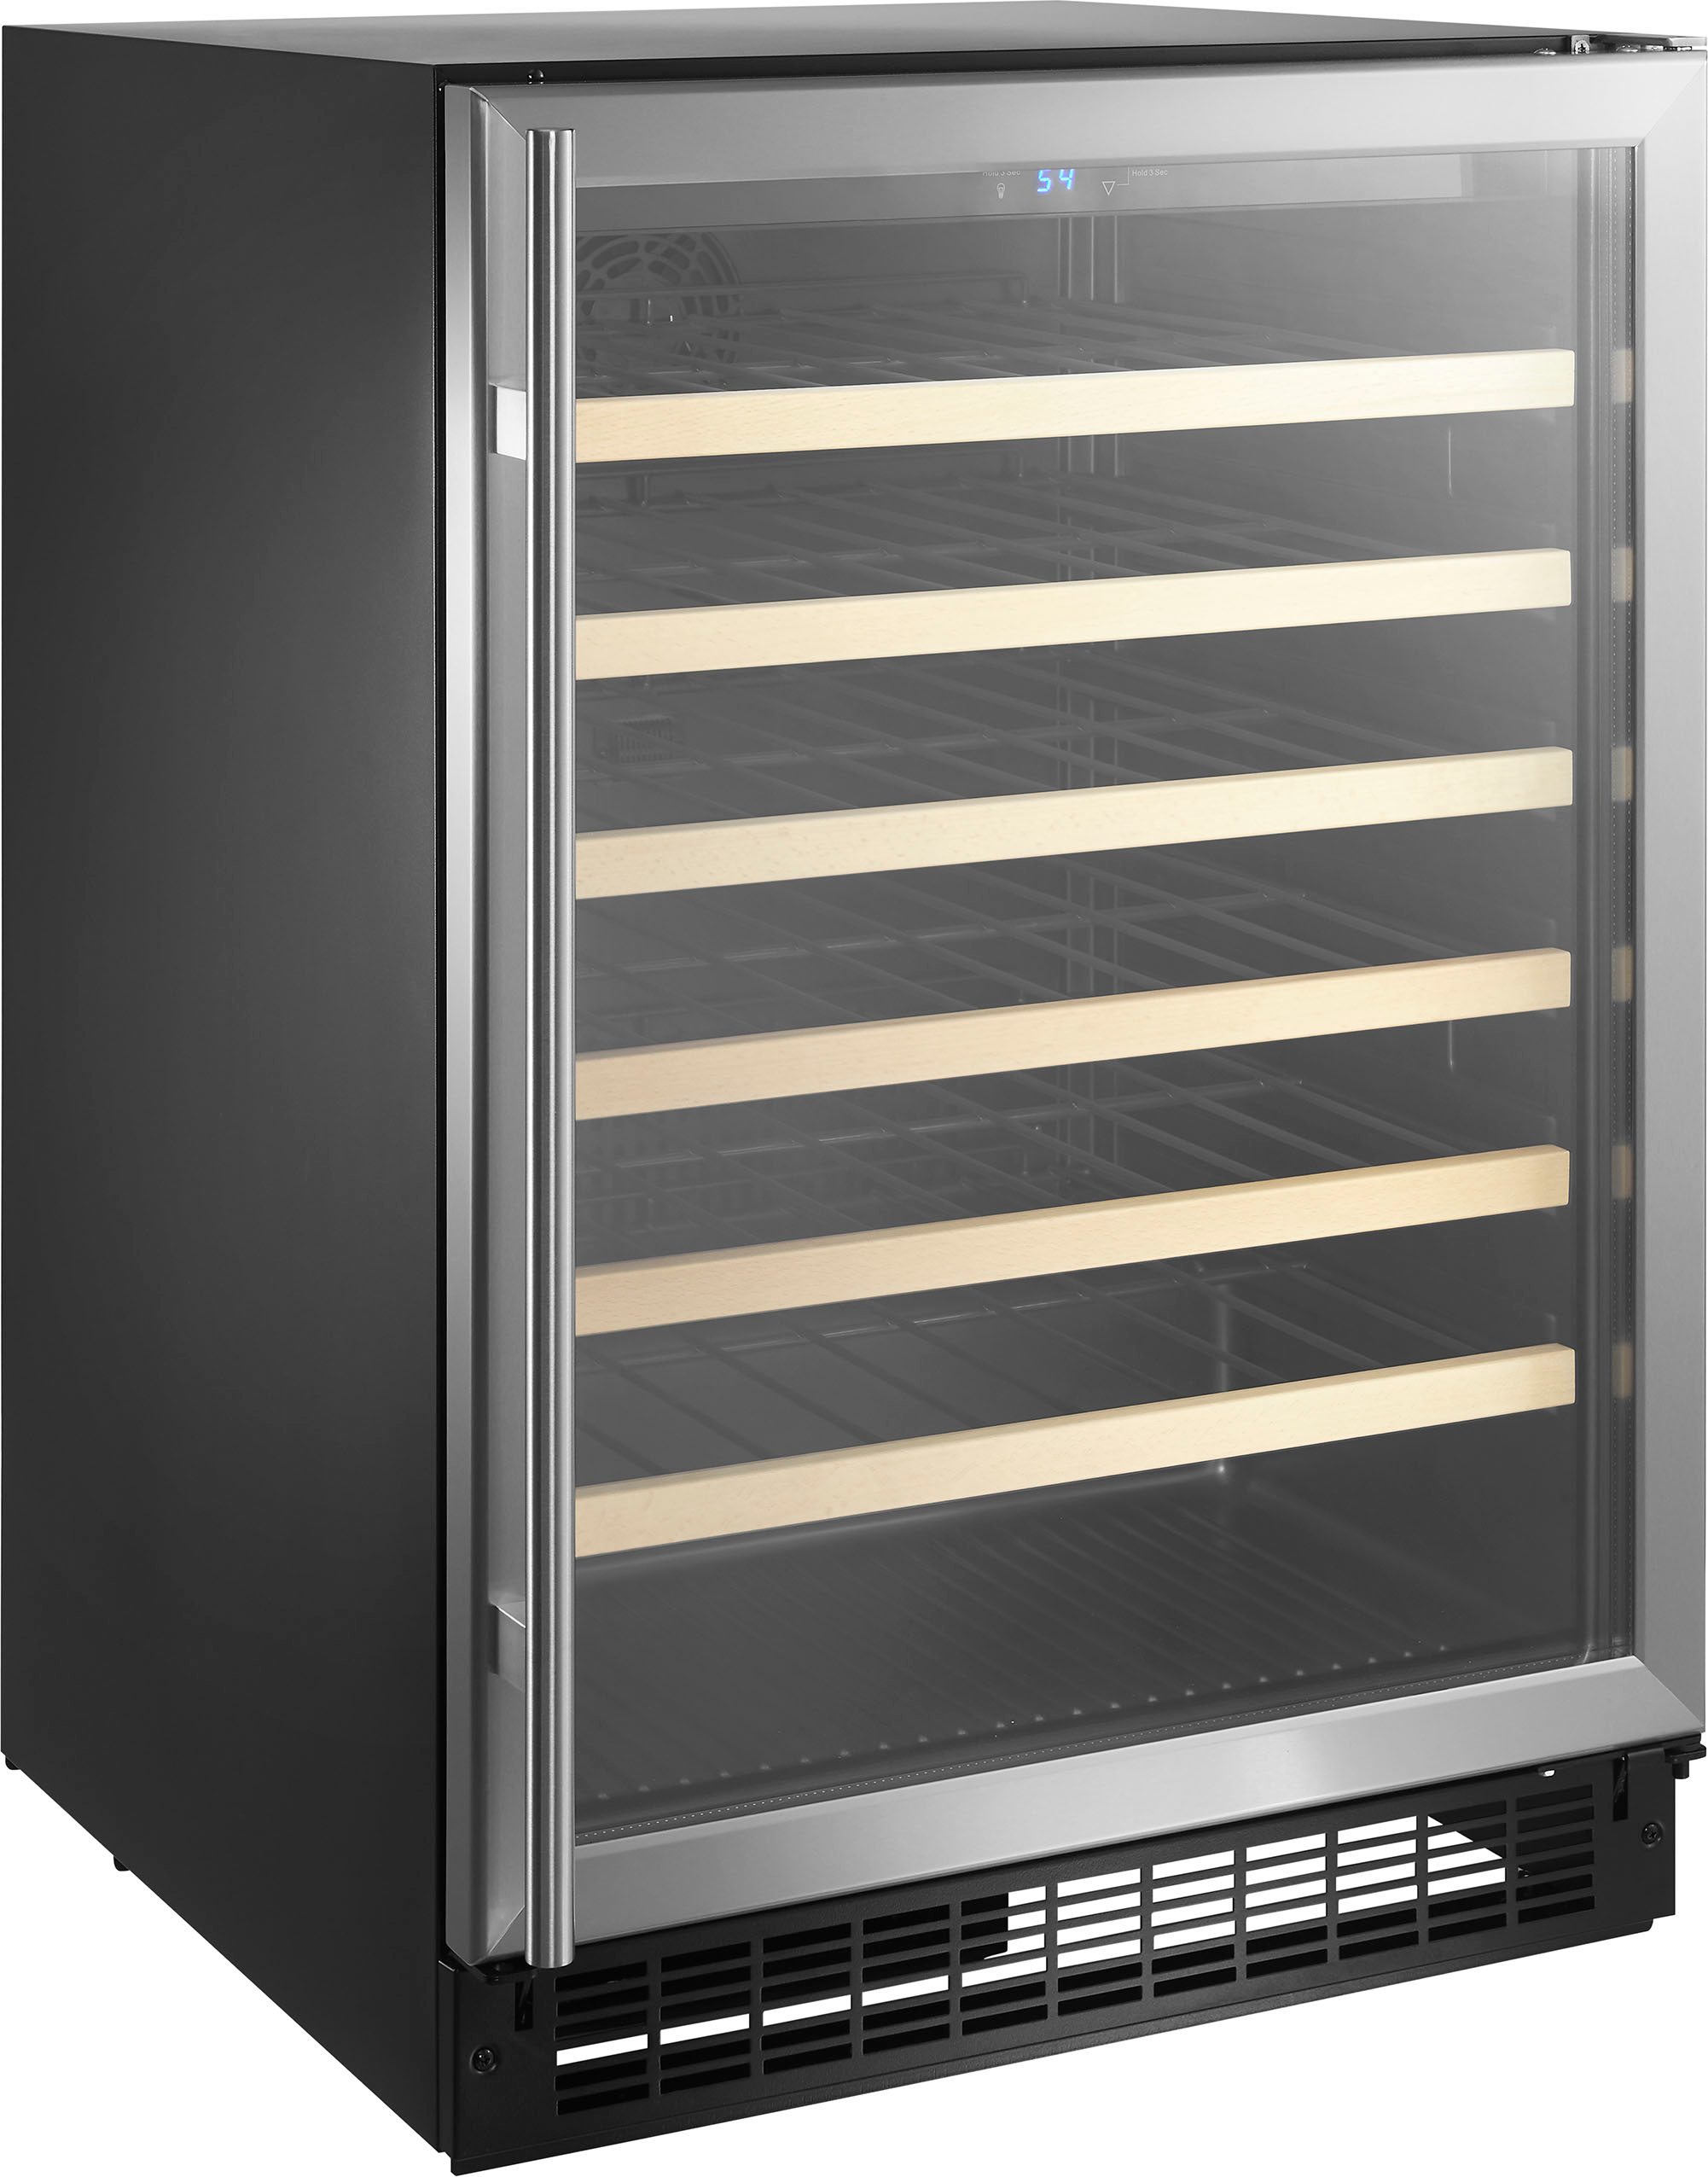 Angle View: Whirlpool - 54-Bottle Built-In Wine Cooler - Black Stainless Steel